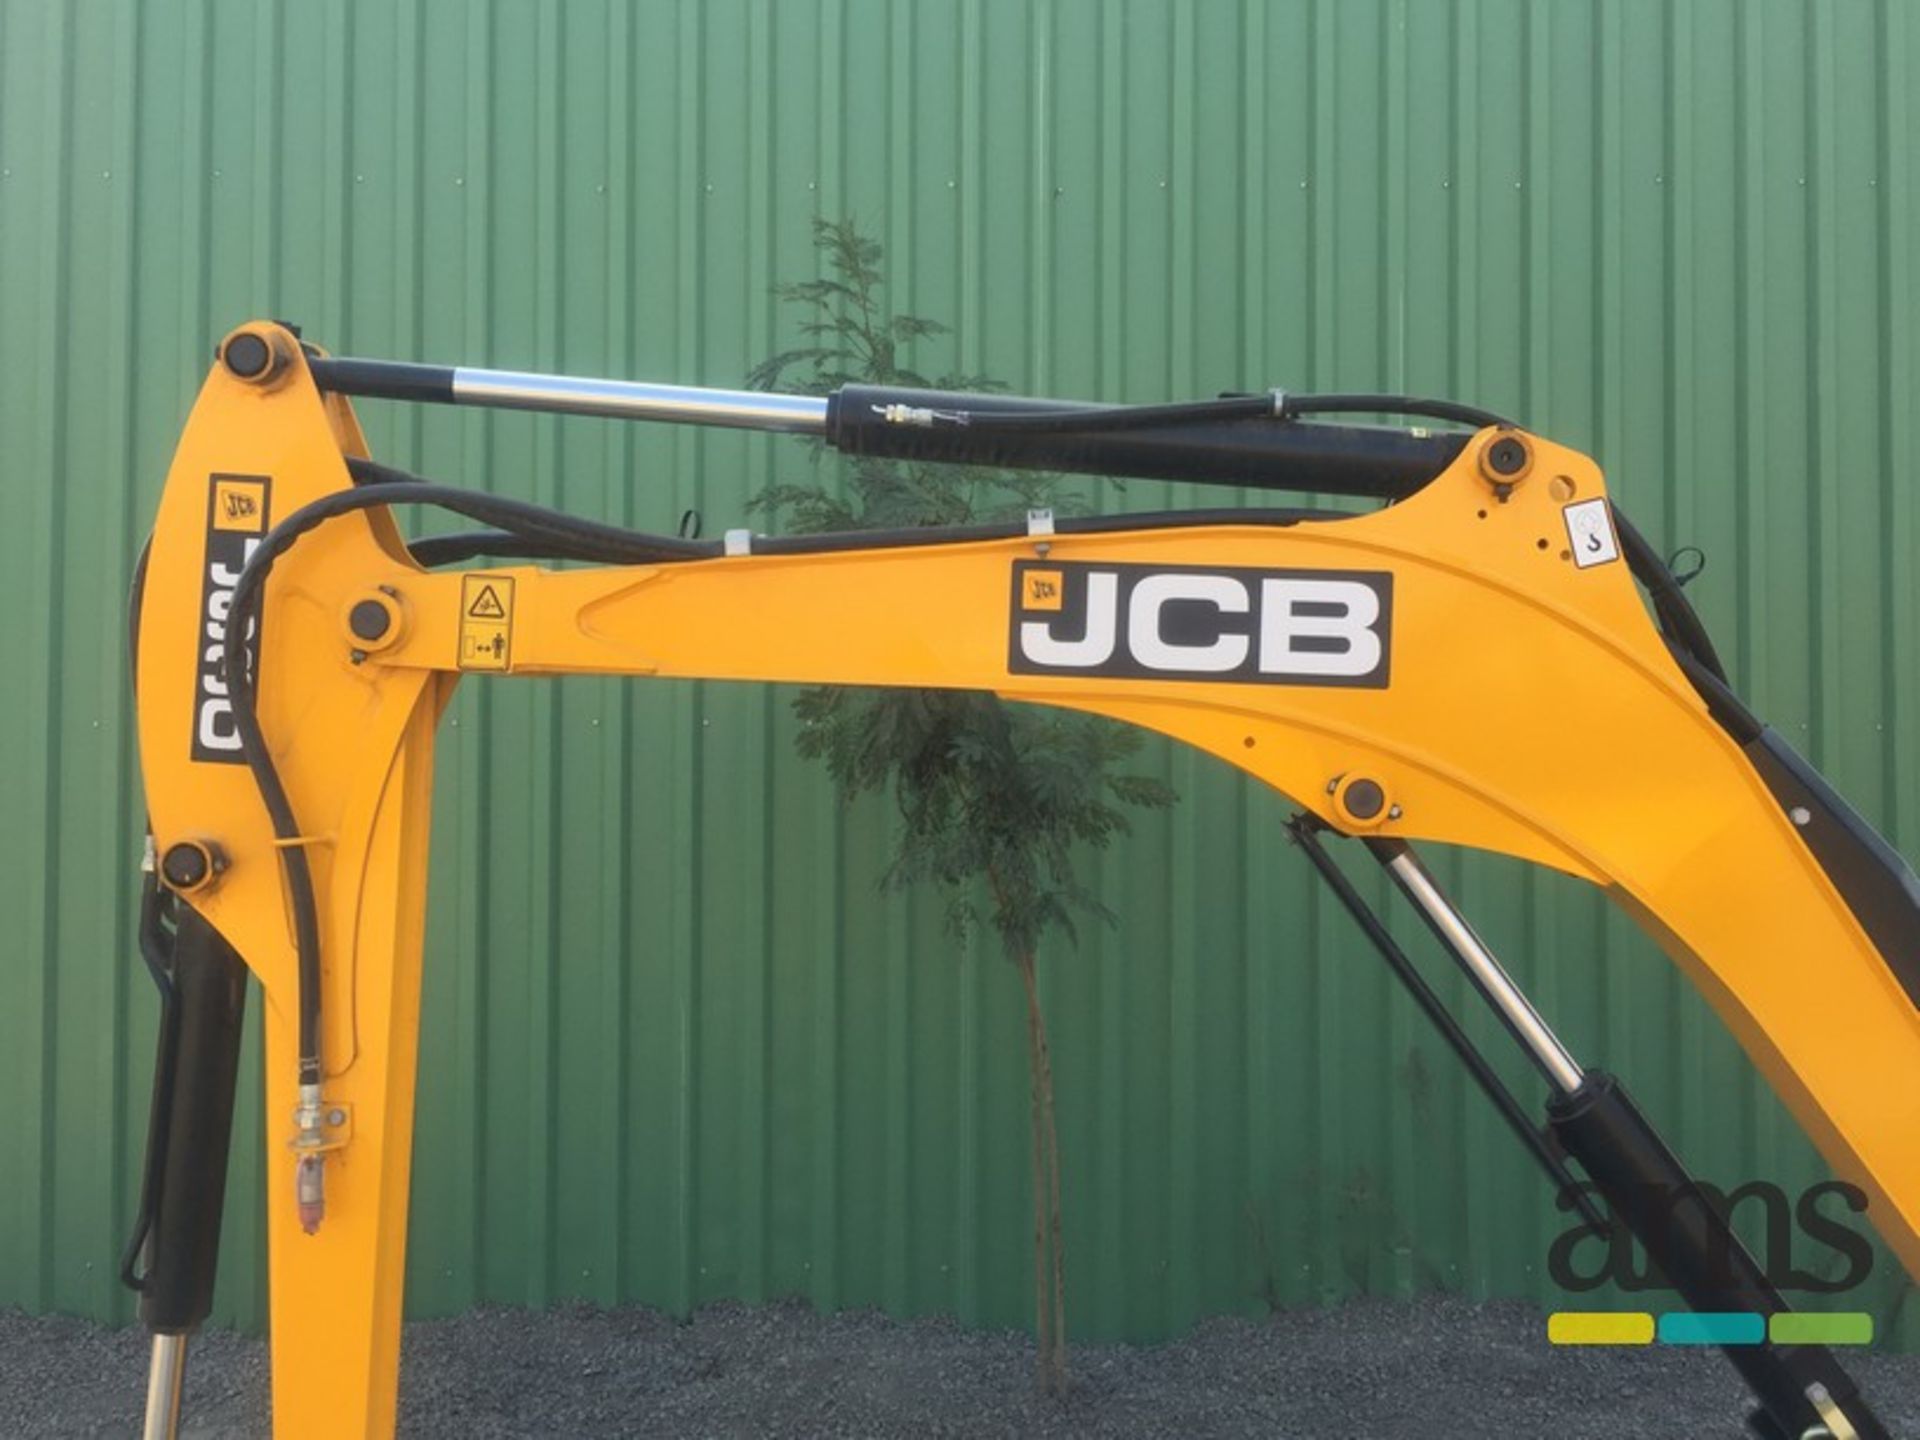 *FOR EXPORT ONLY* 2014, JCB 8026CTS Excavator, Serial No. 305249 c/w Steel Tracks, Single Auxiliary, - Image 10 of 18